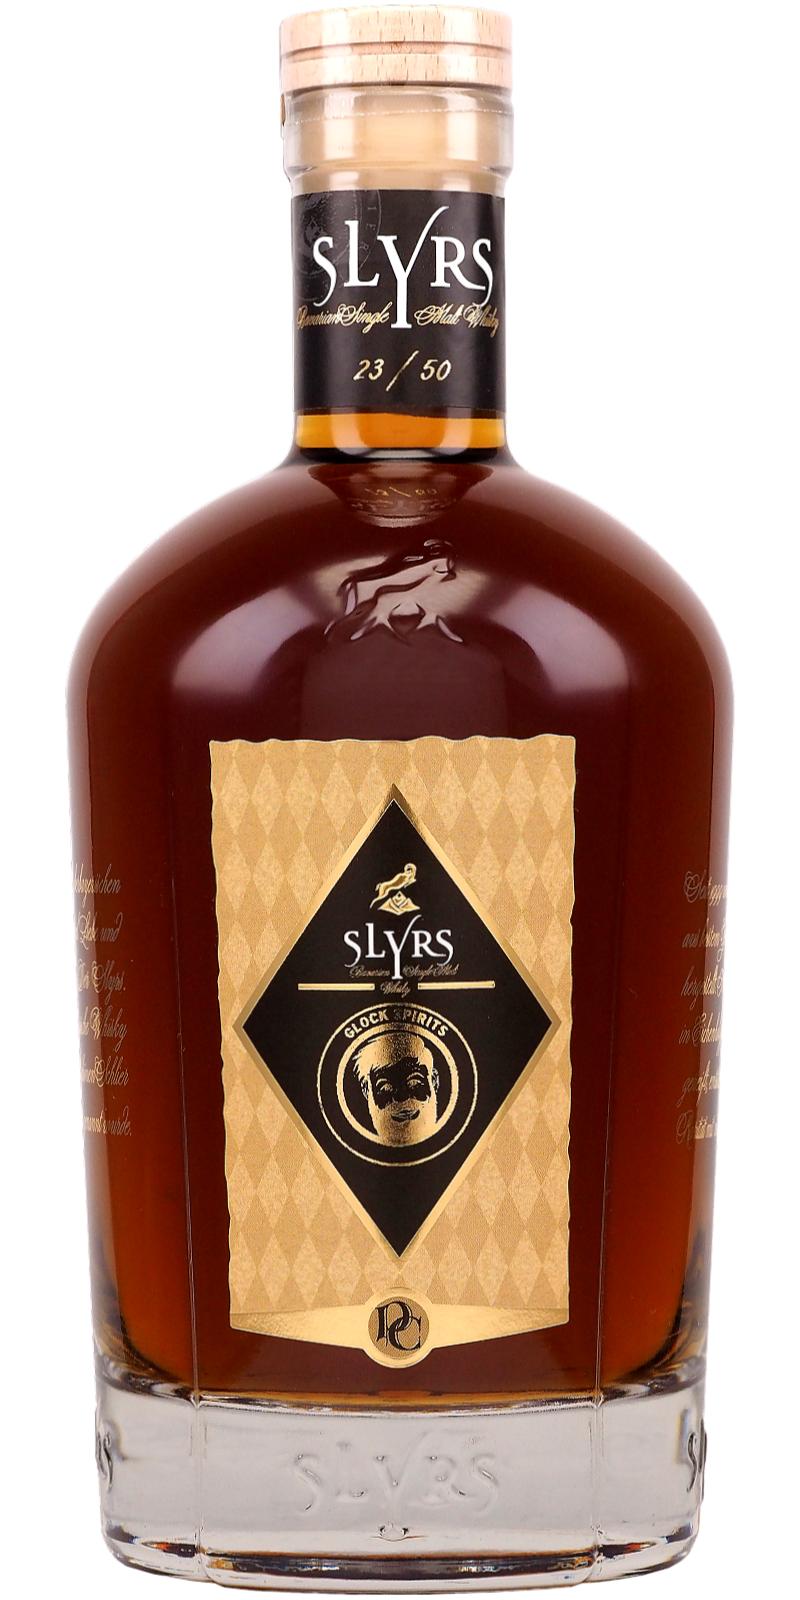 Slyrs Private Cask GSp